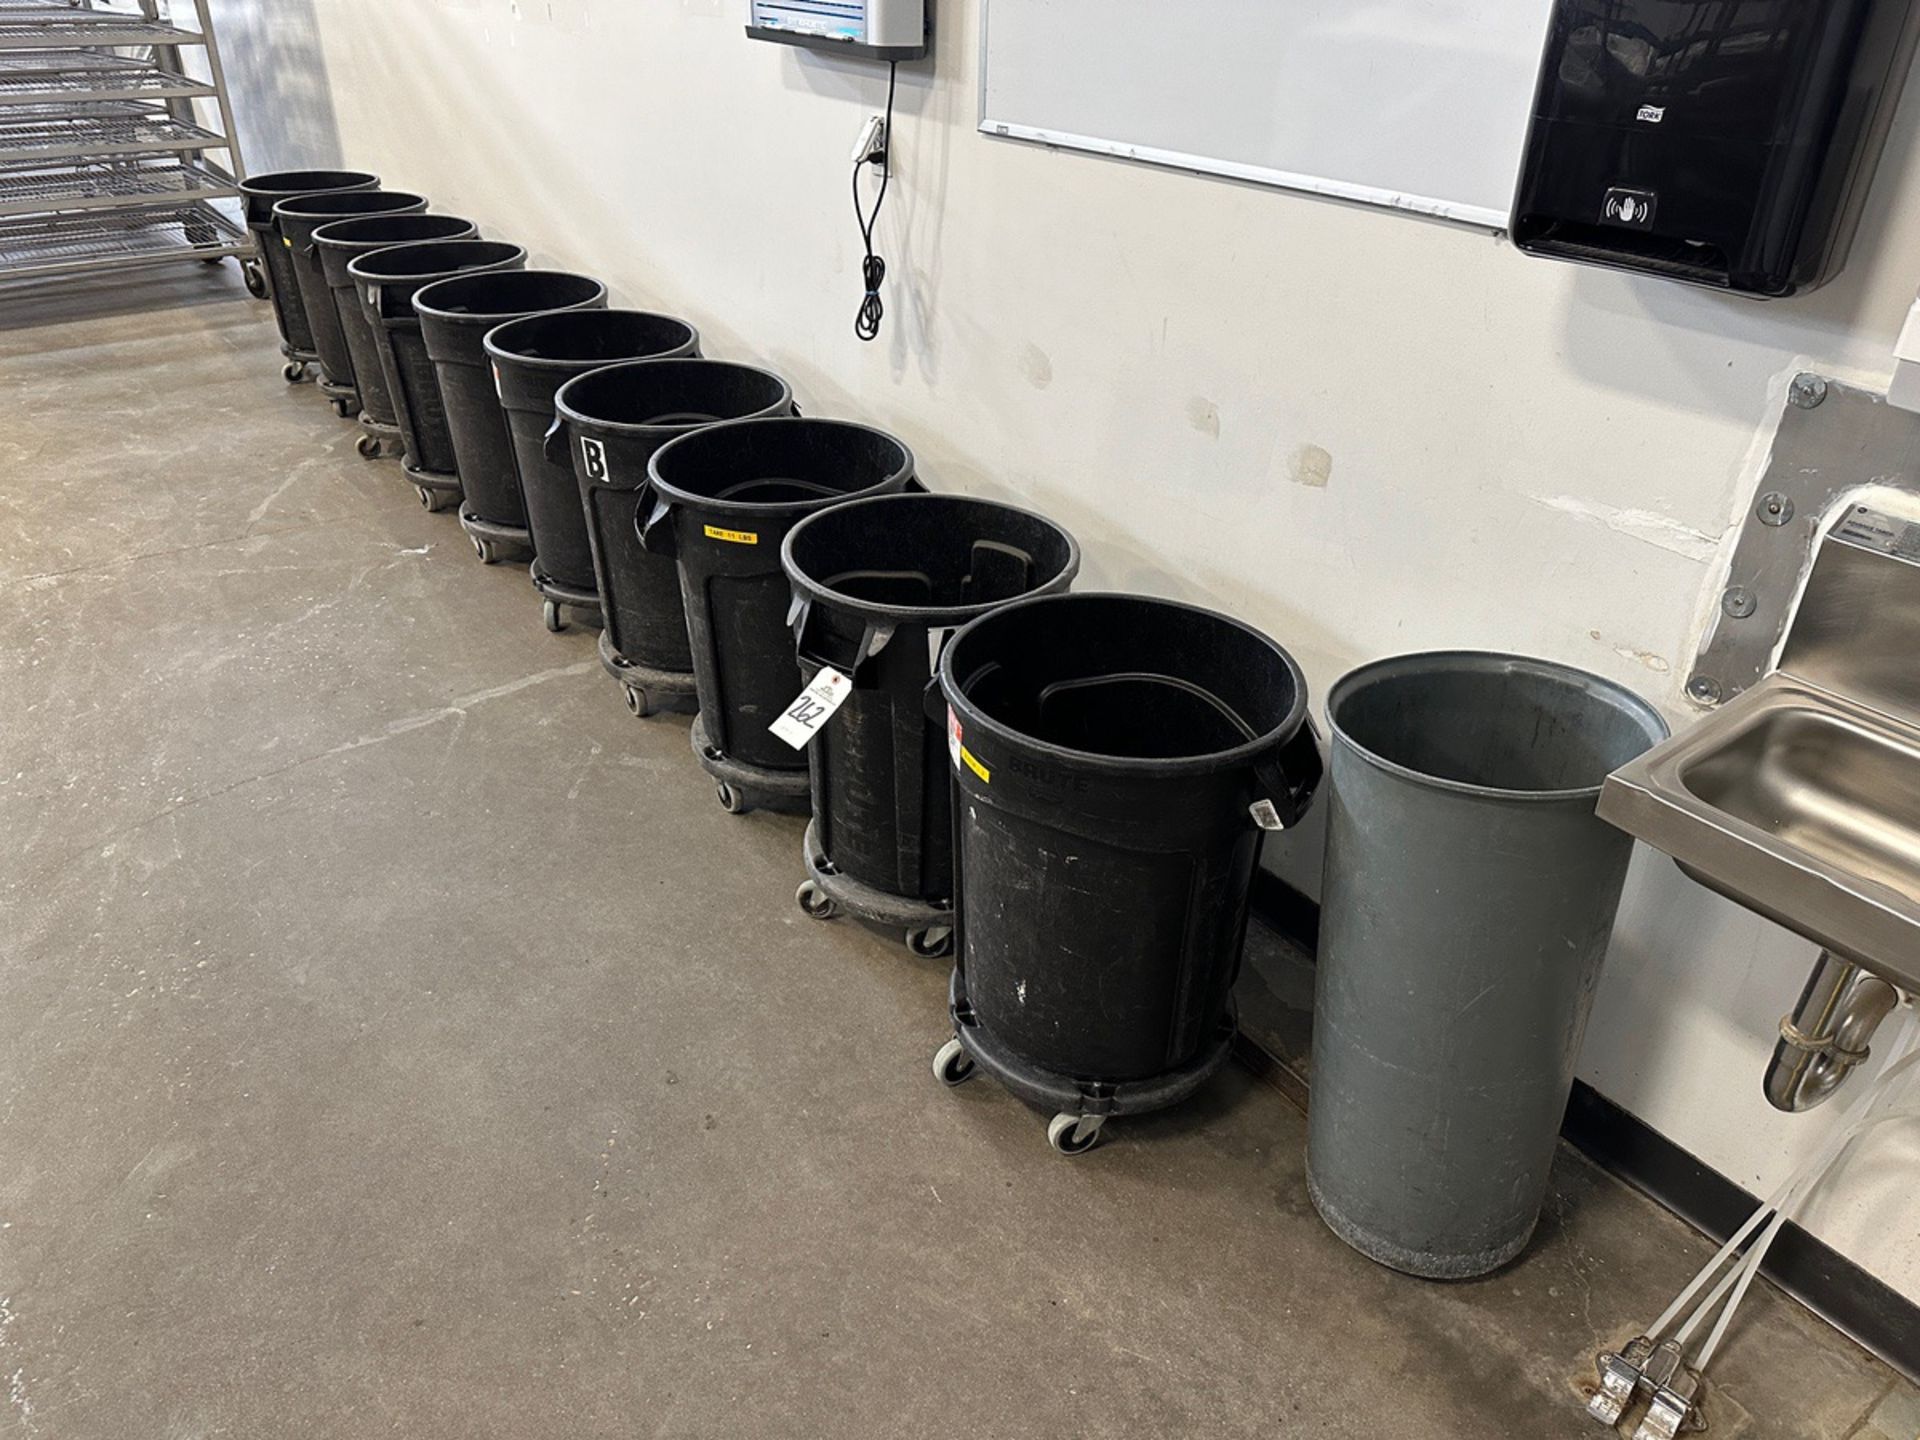 Lot of (11) 35 Gallon Garbage Cans on Dollies | Rig Fee $50